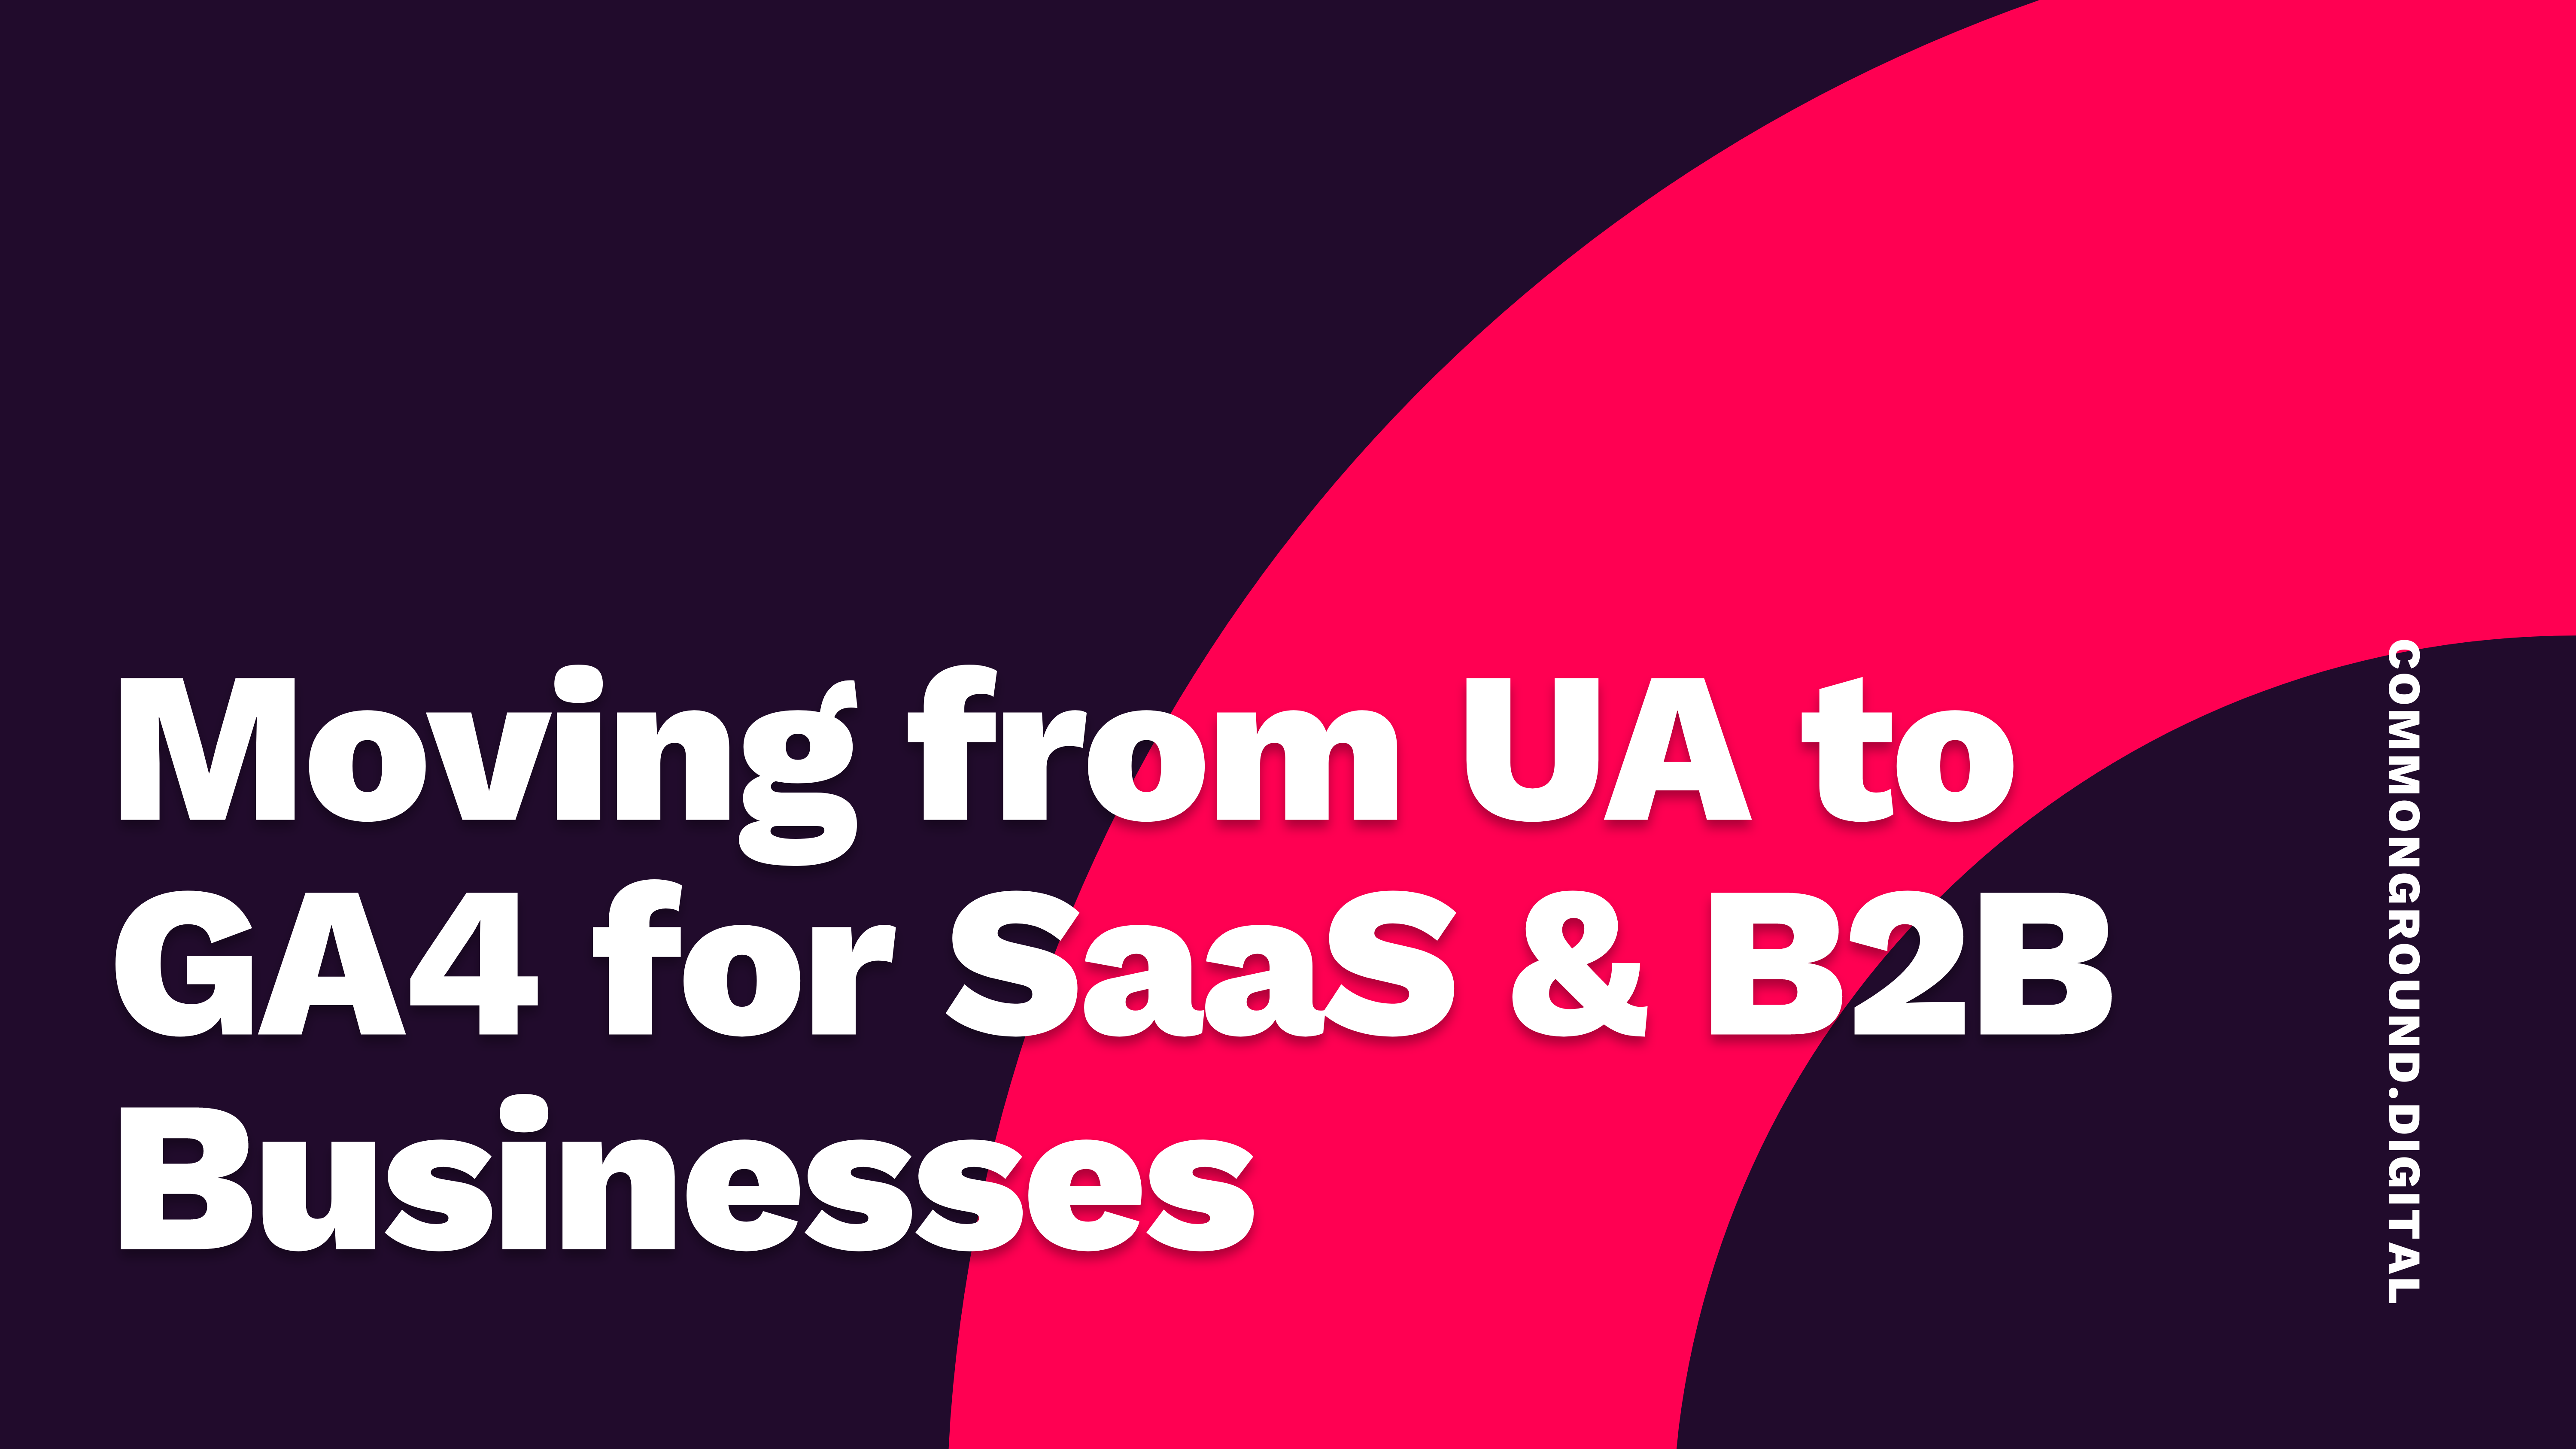 Moving from UA to GA4 for SaaS & B2B Businesses